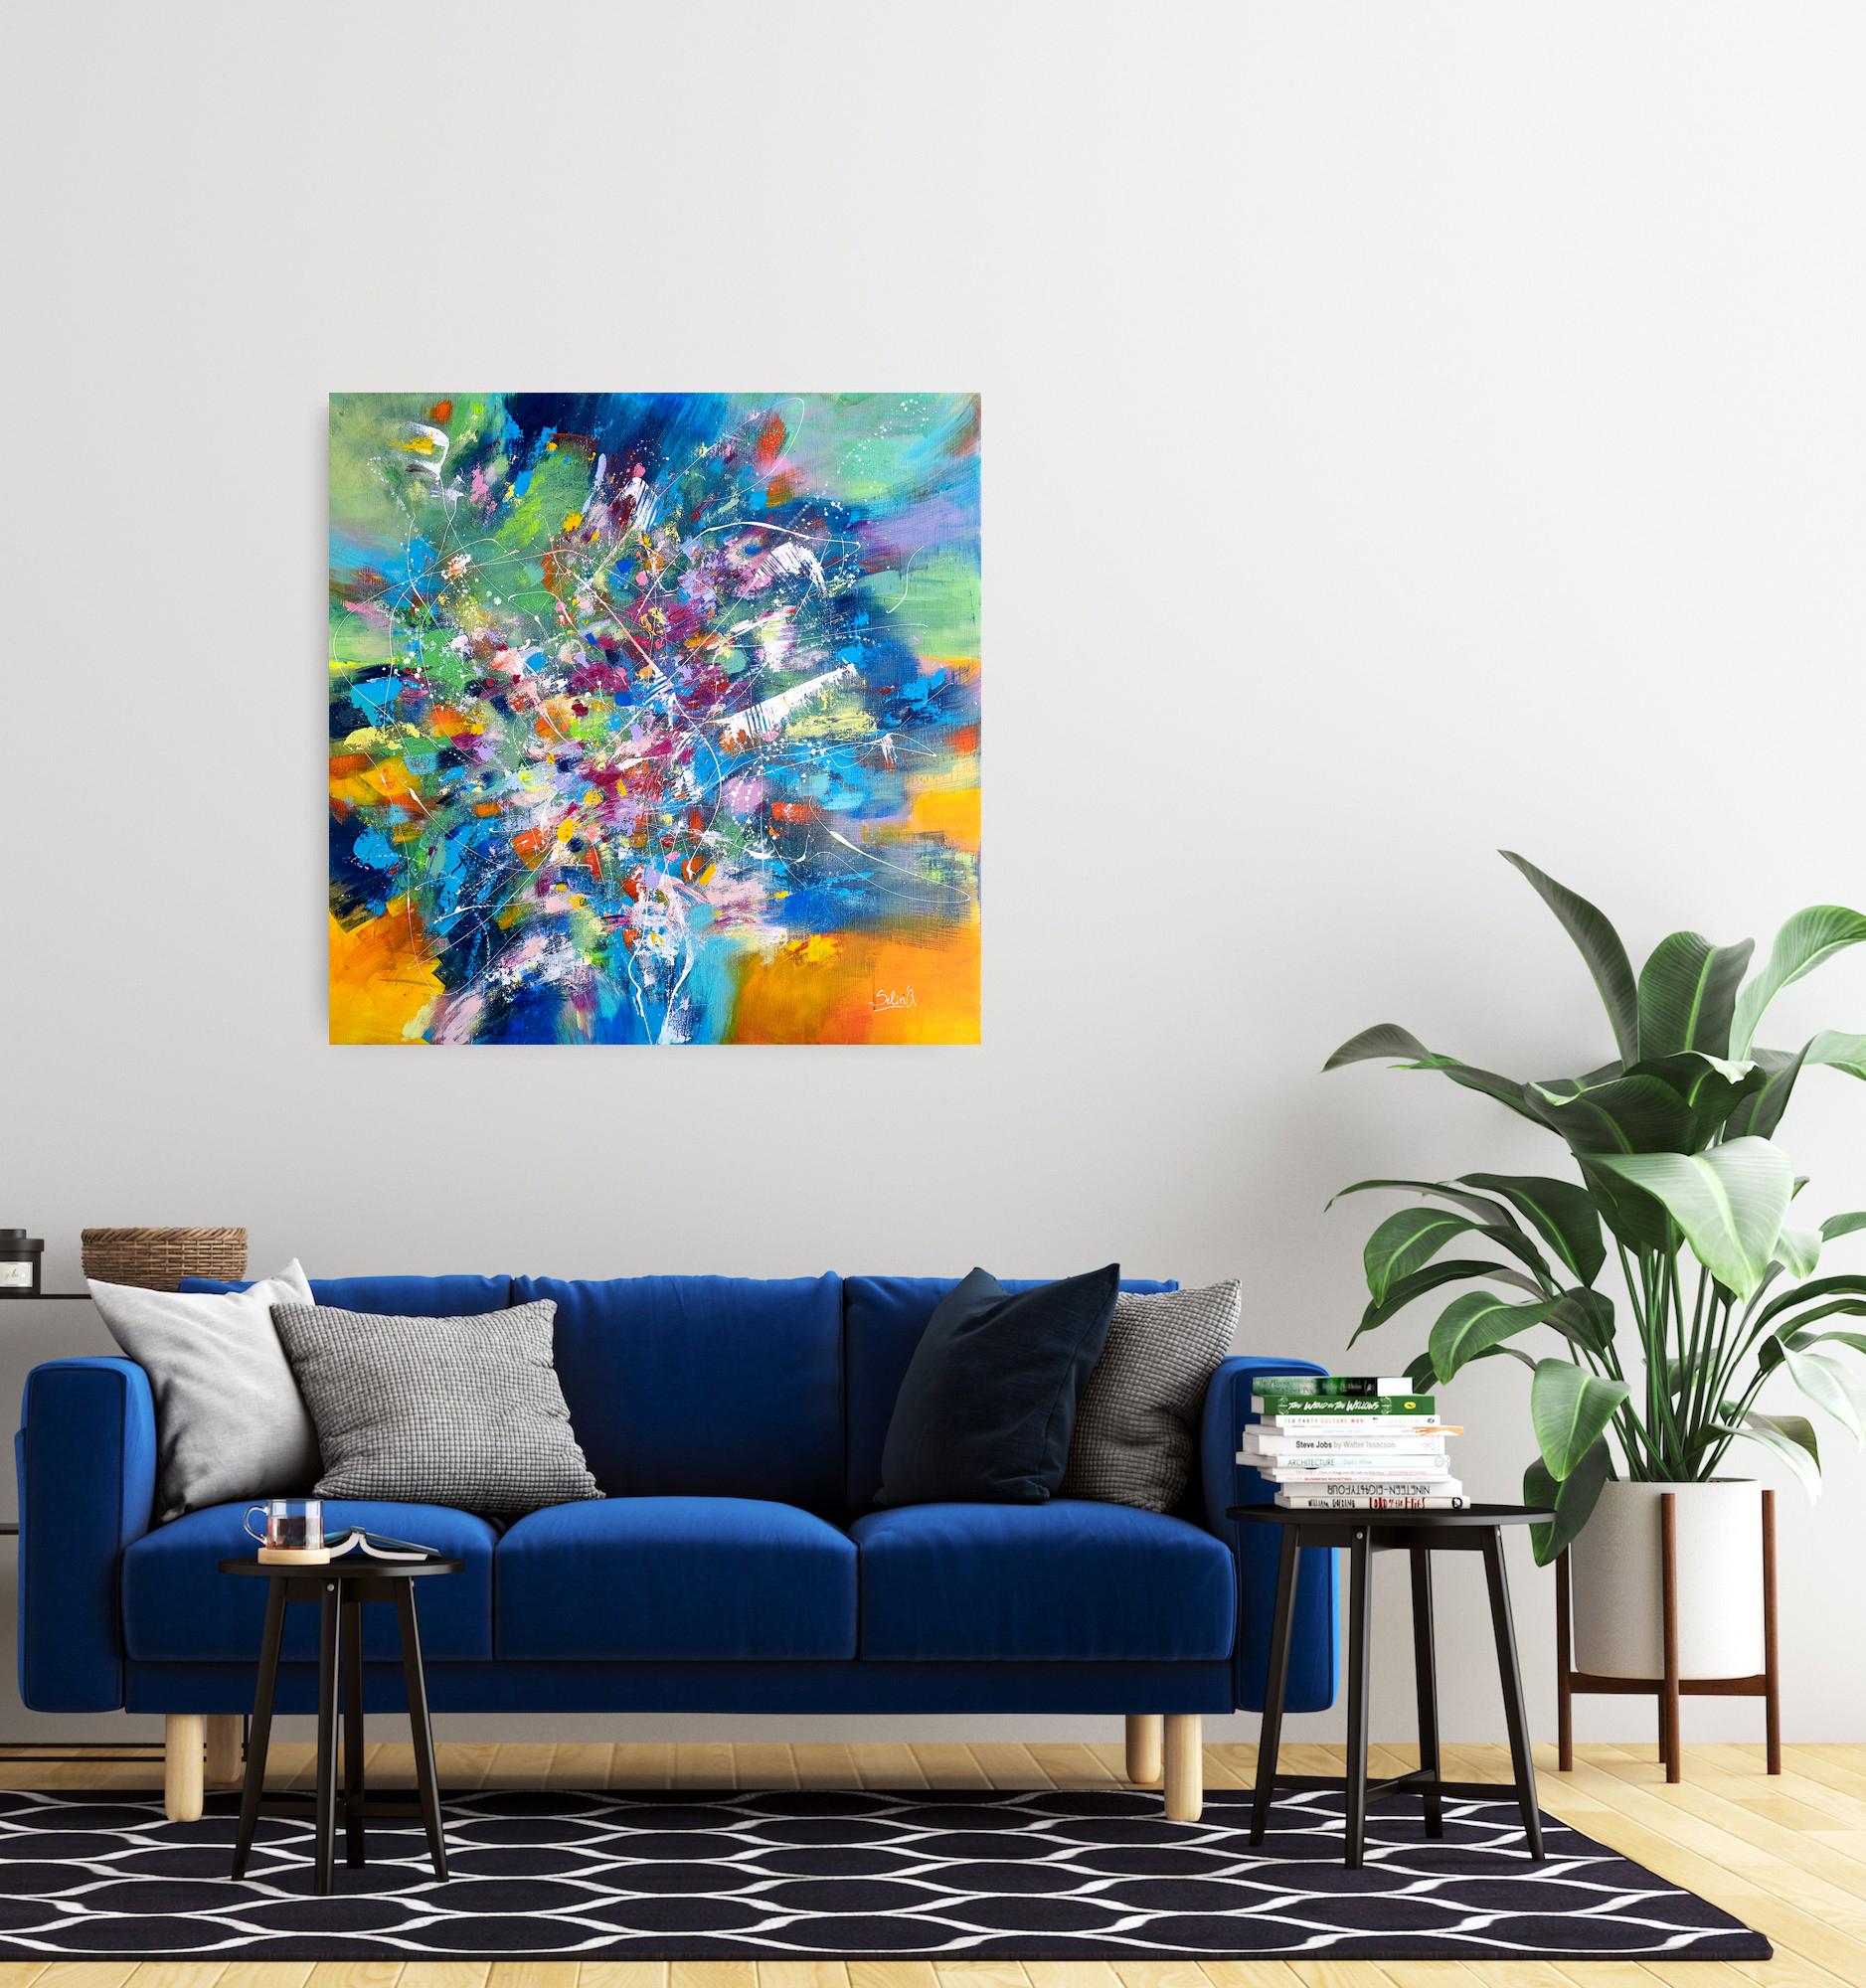 Butterfly effect, Modern Colorful Abstract Painting 100x100cm by Anna Selina 3